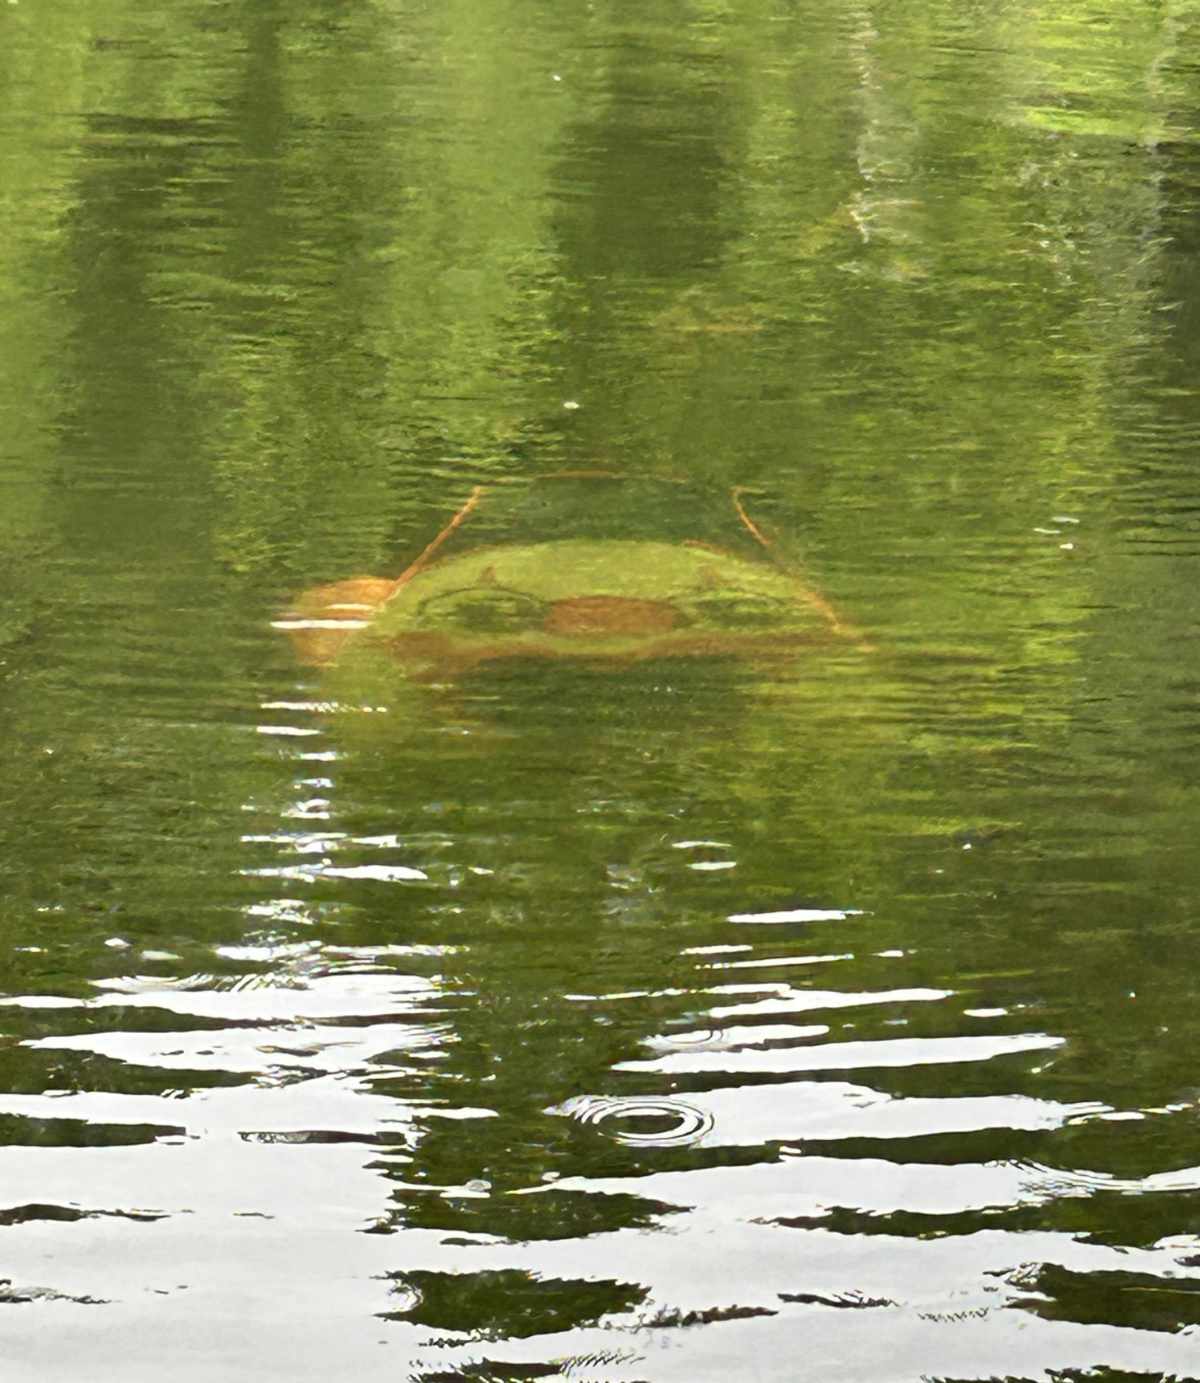 This small tent shaped like a clown blew into a lake, faced itself upwards and scared the hell out of everyone who came across it on bass open